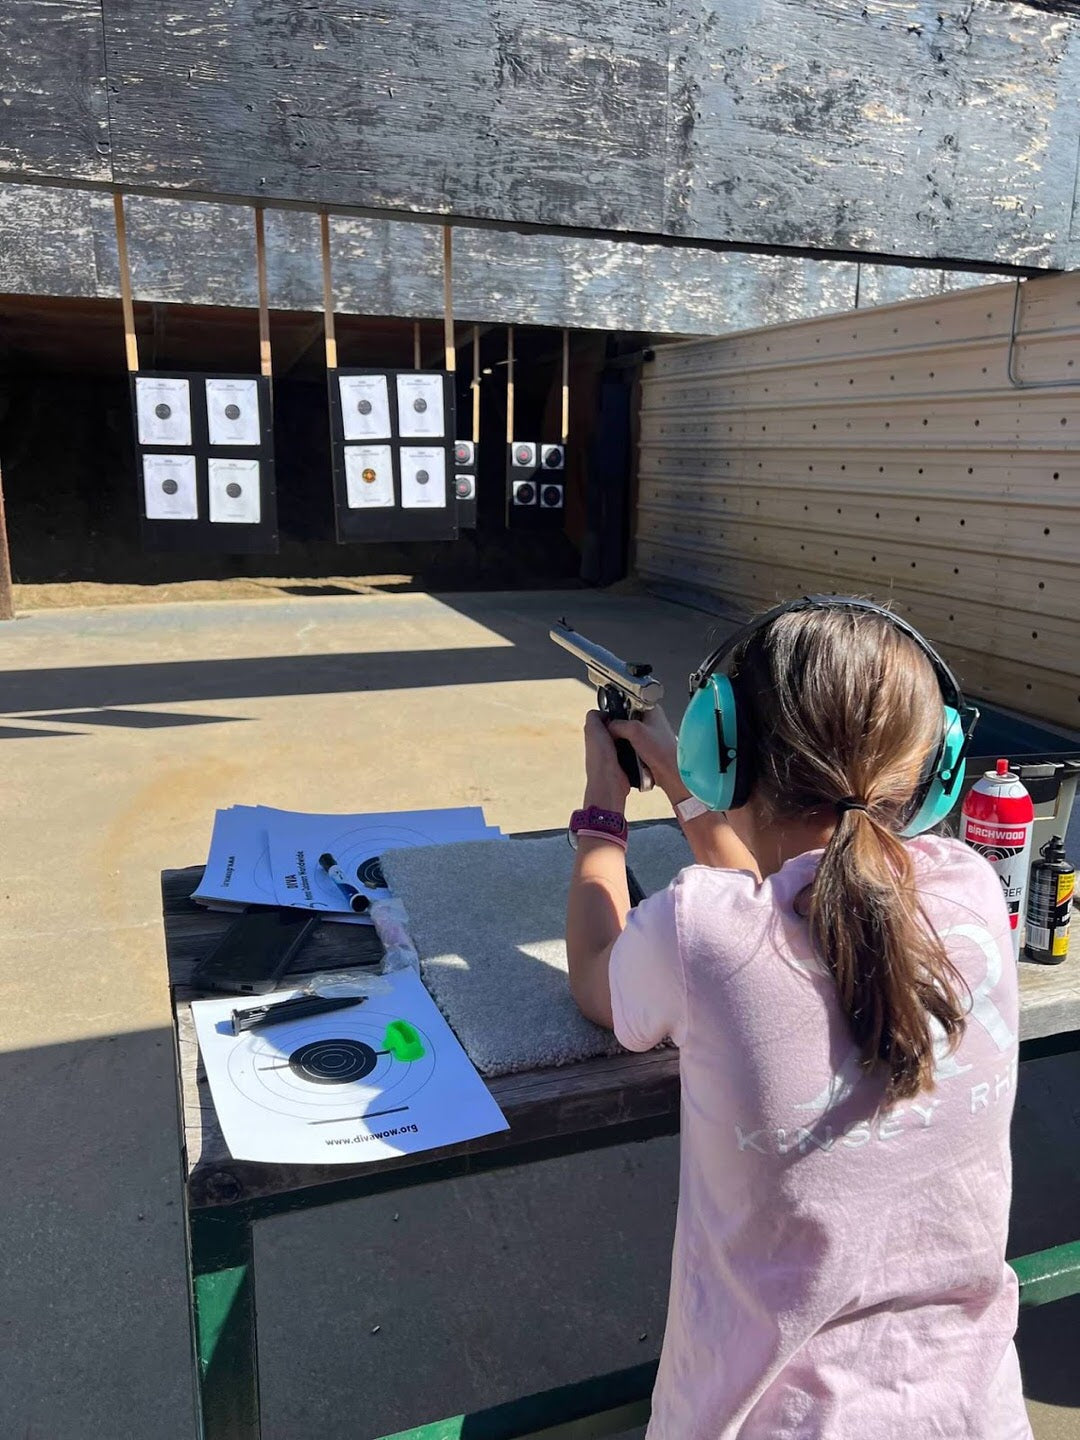 Shooting Sports from a Kid's Point of View